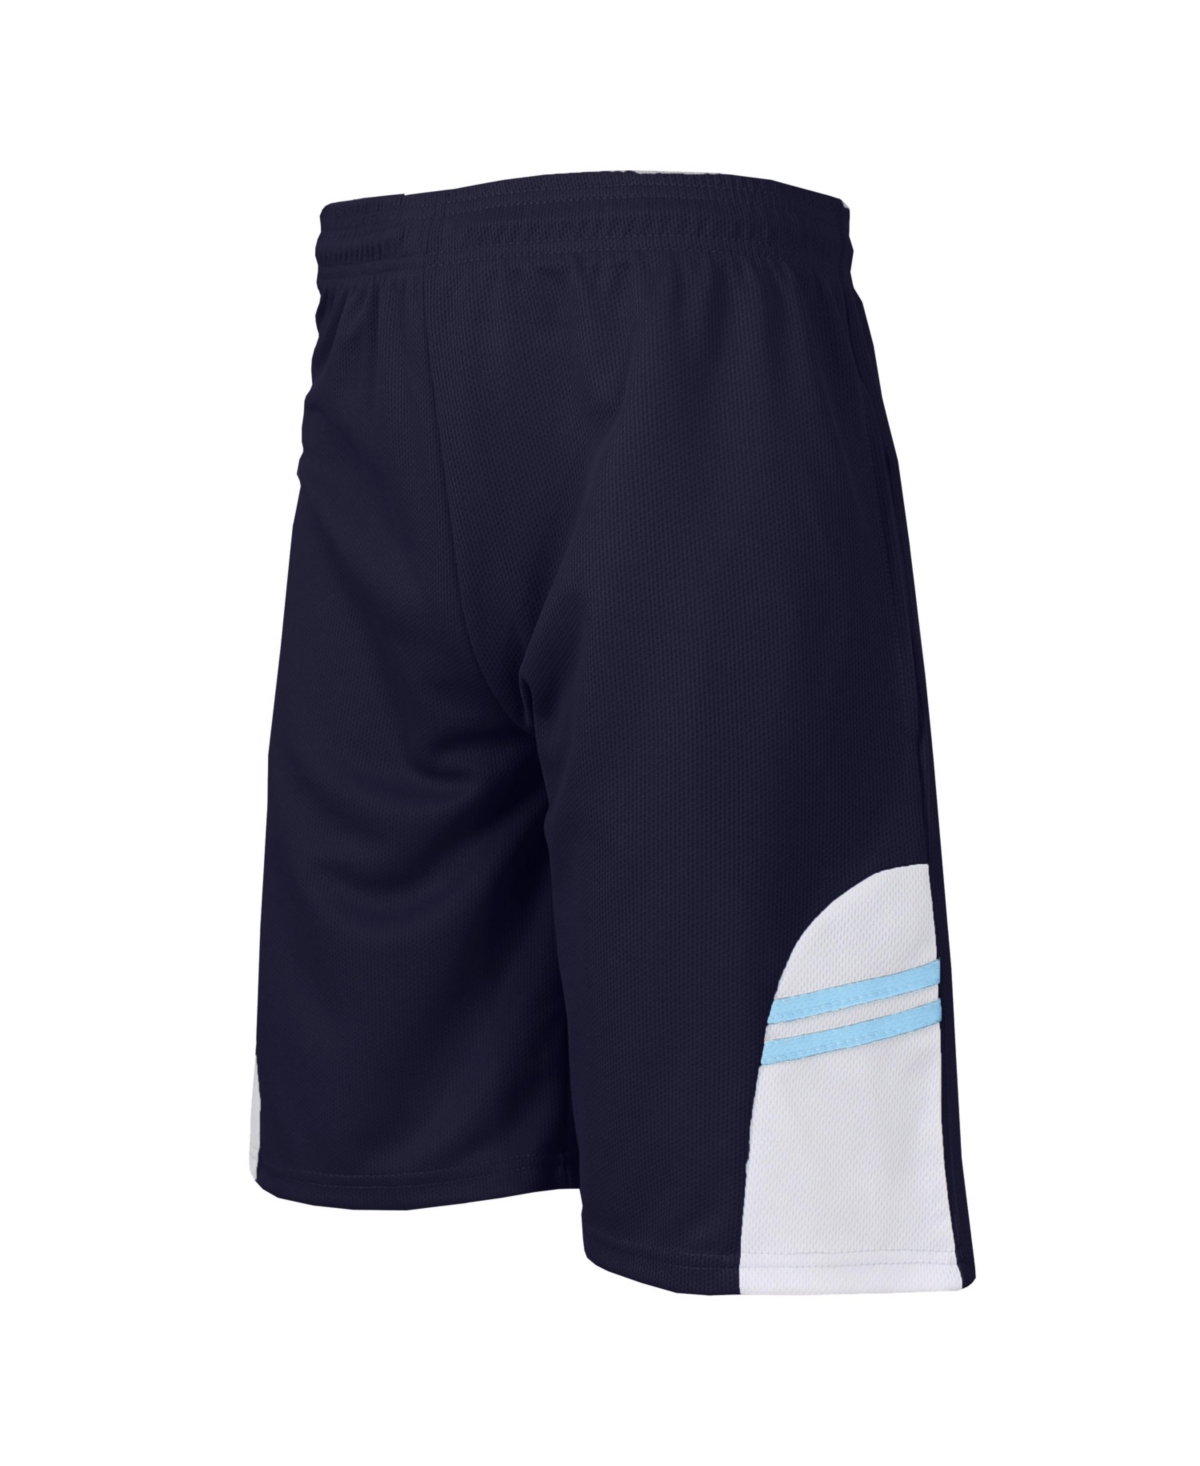 Shop Galaxy By Harvic Men's Moisture Wicking Shorts With Side Trim Design In Navy